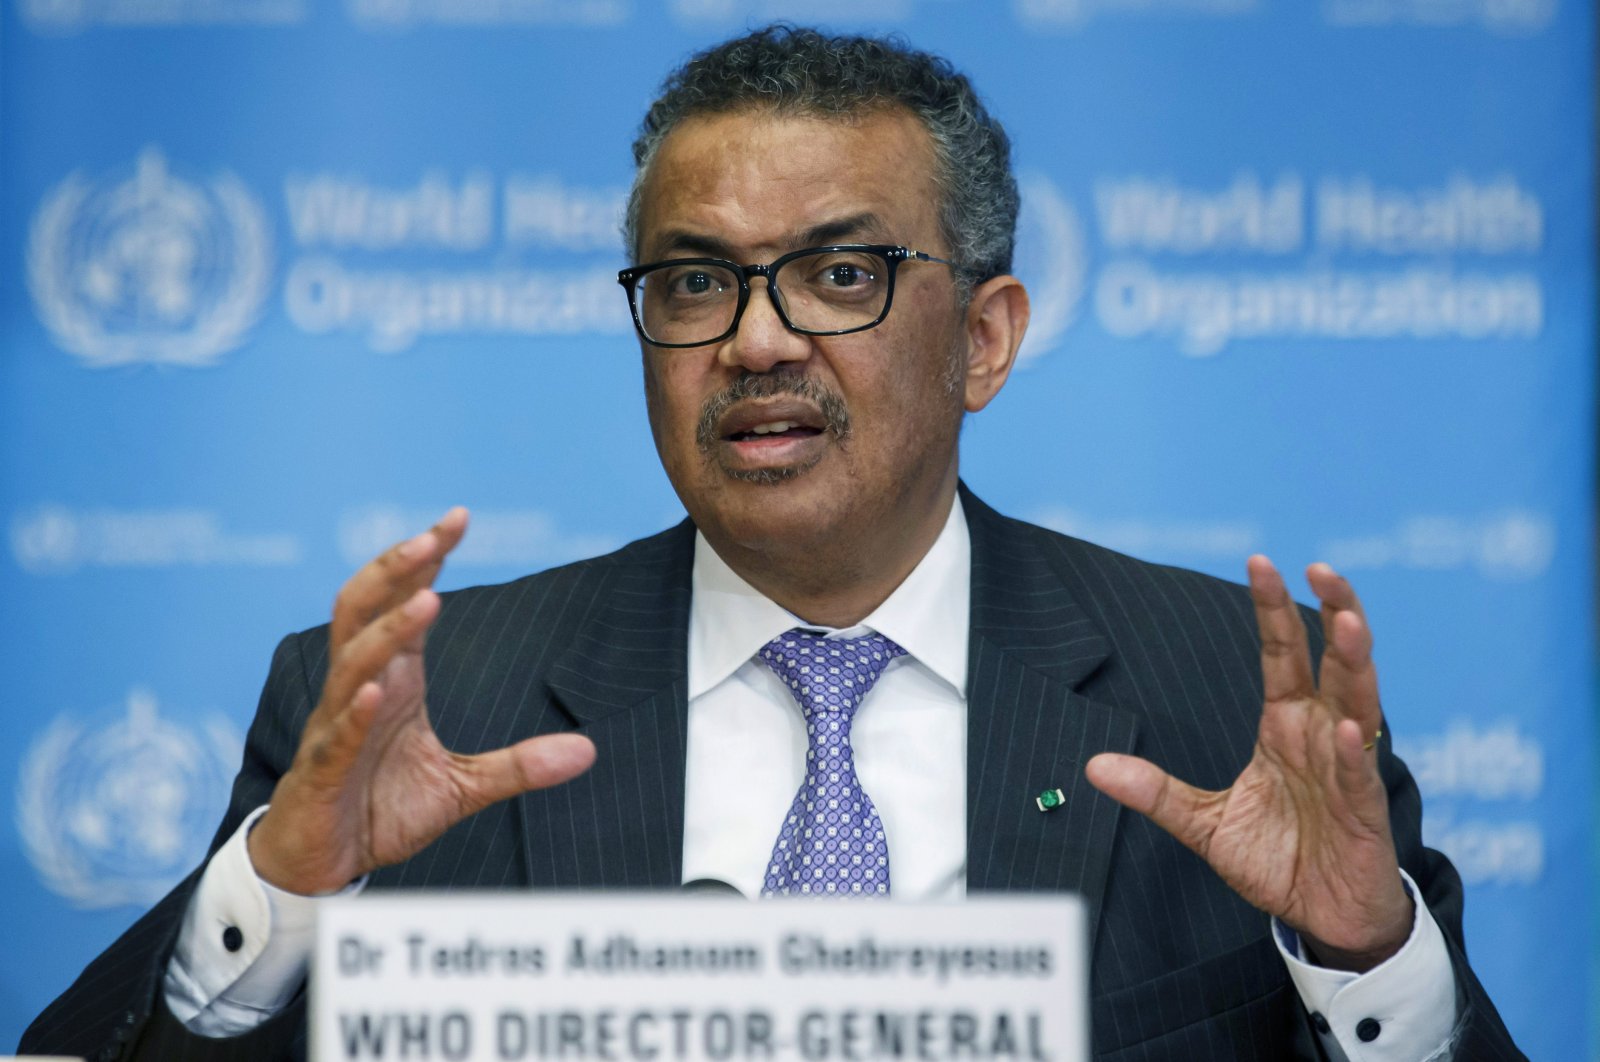 In this Monday, March 9, 2020 file photo, Tedros Adhanom Ghebreyesus, Director General of the World Health Organization speaks during a news conference, at the WHO headquarters in Geneva, Switzerland. (AP Photo)